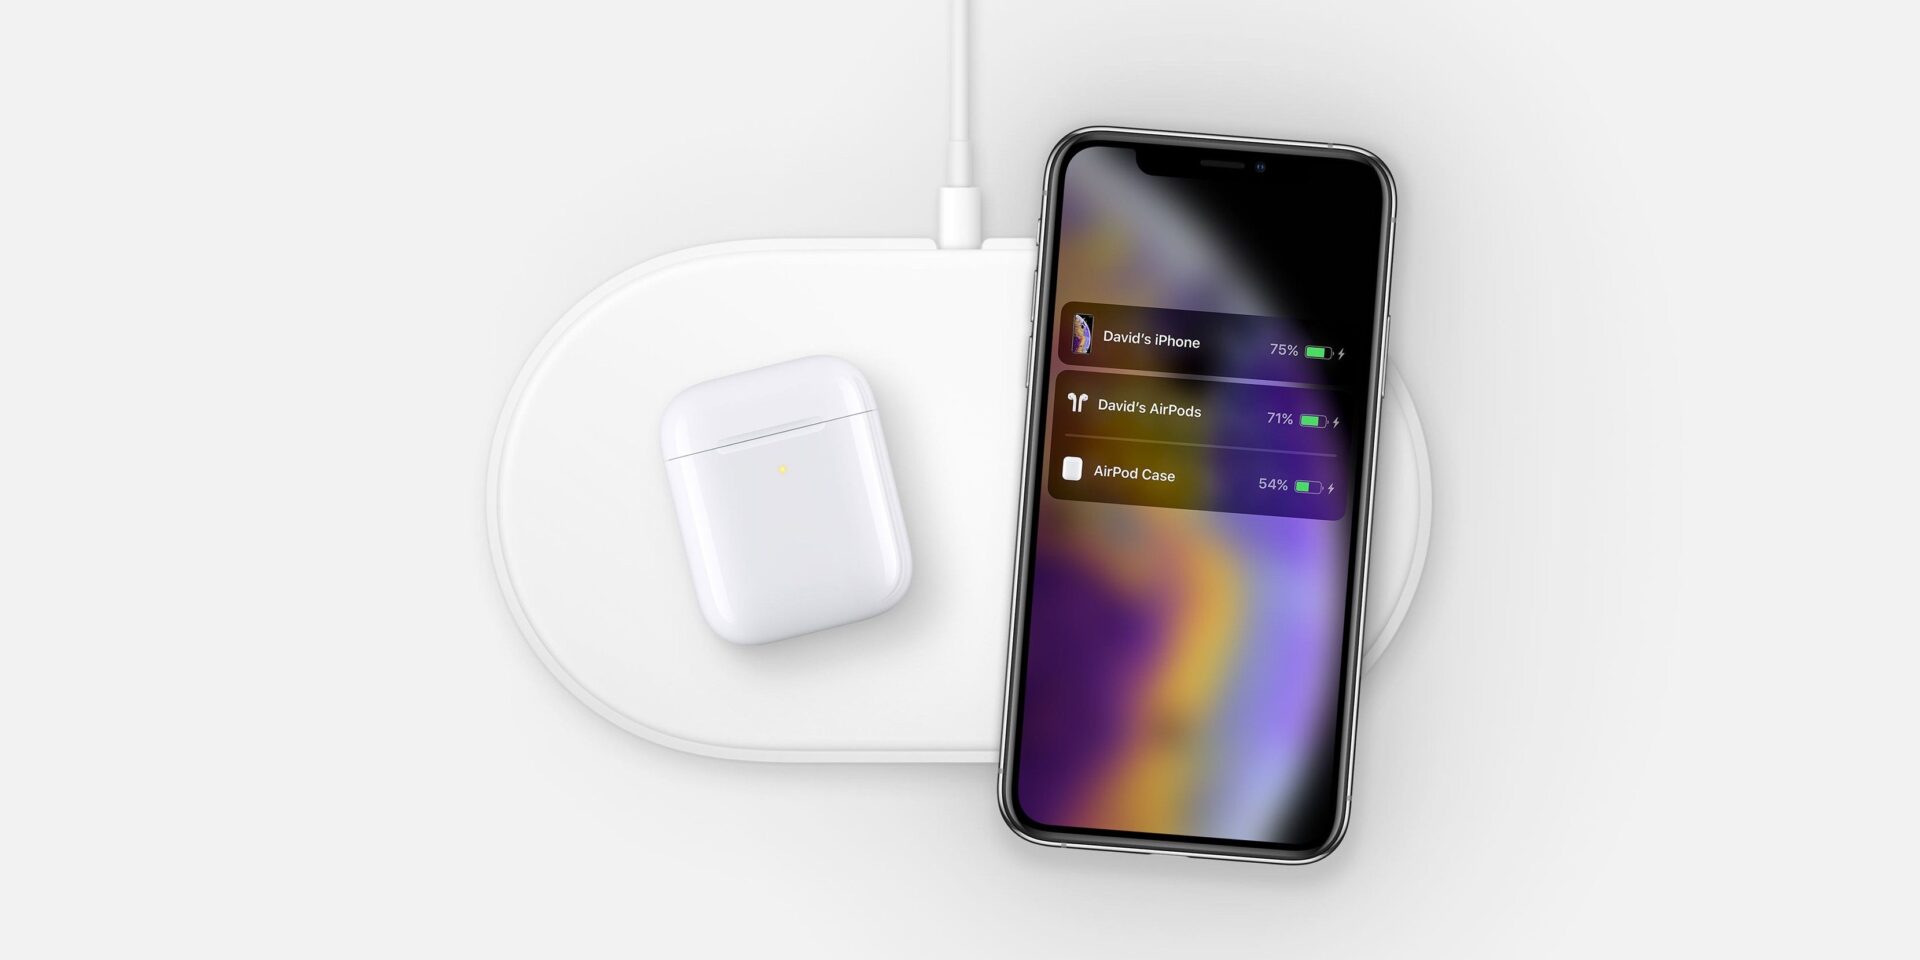 Yet another tipoff on Apple AirPower leaks with radical iPhone upgrade